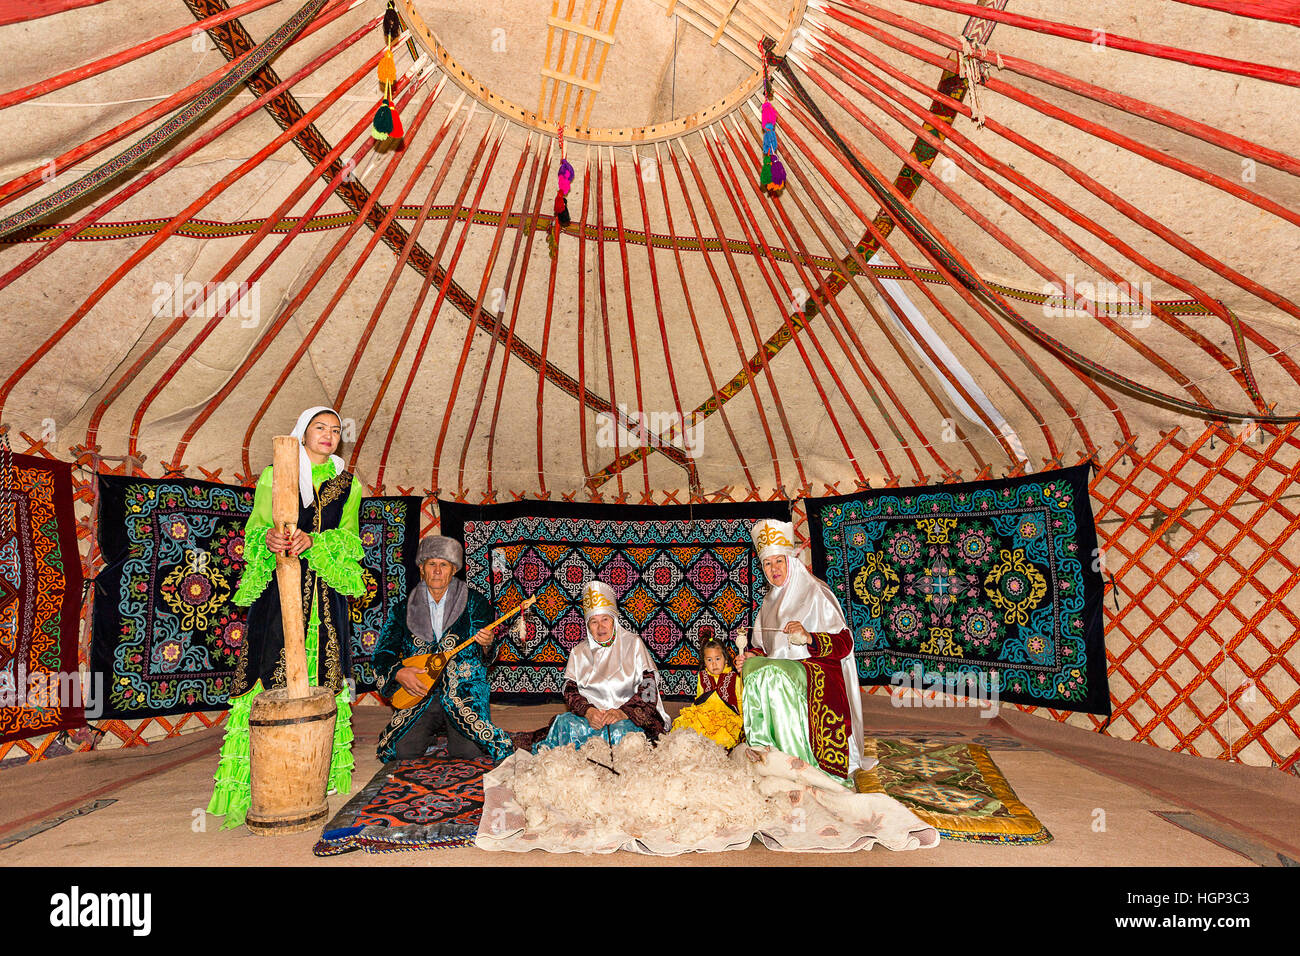 Kazakh people in a nomadic yurt with a woman who spins the wool and a man playing local musical instrument of dombra in Almaty, Stock Photo